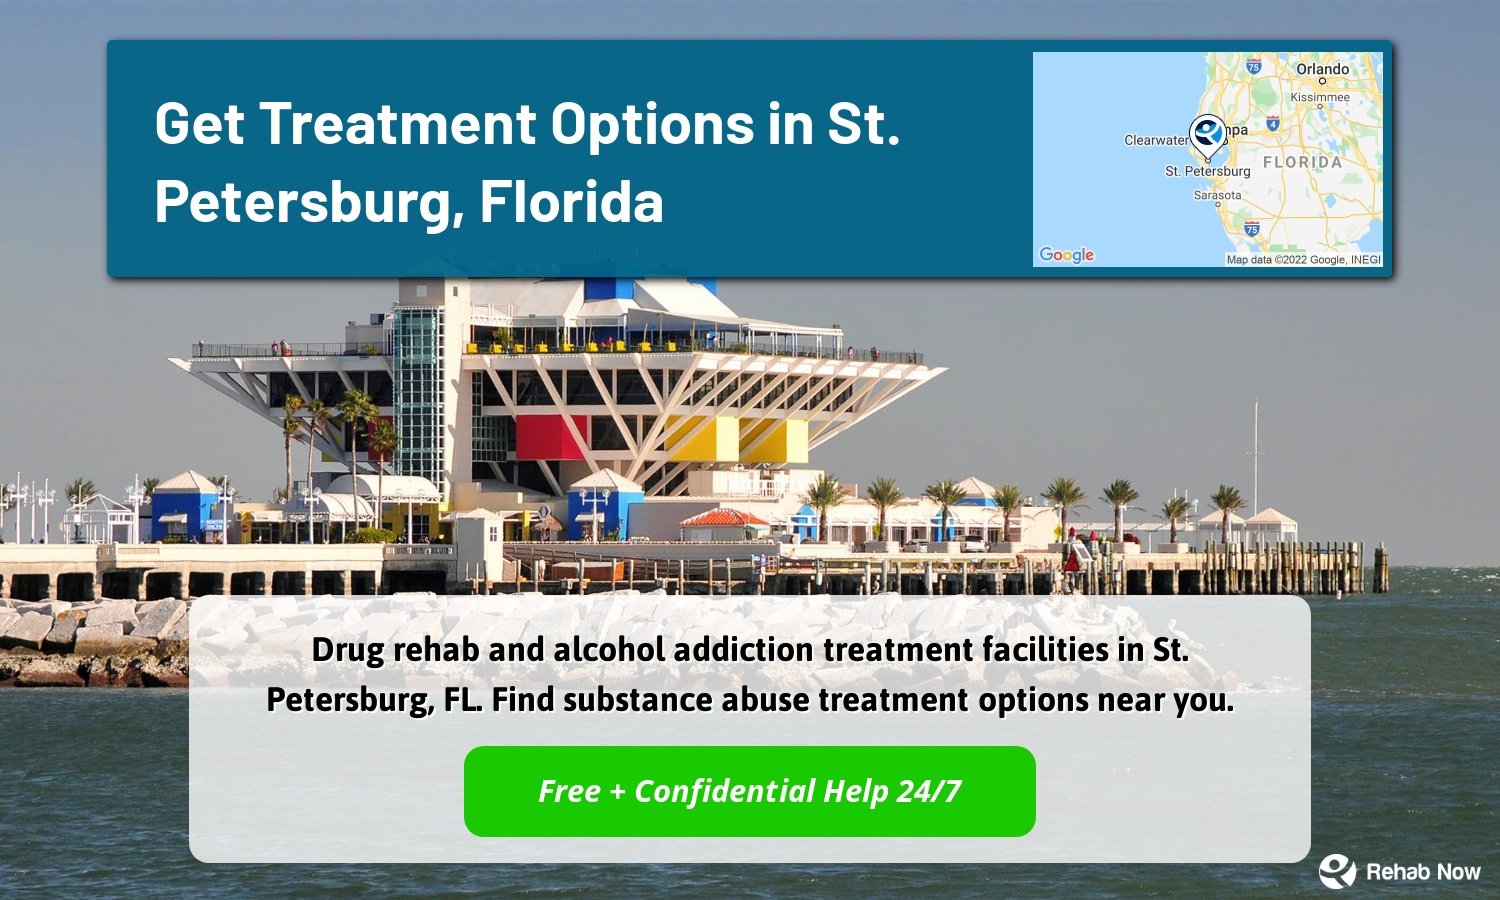 Drug rehab and alcohol addiction treatment facilities in St. Petersburg, FL. Find substance abuse treatment options near you.